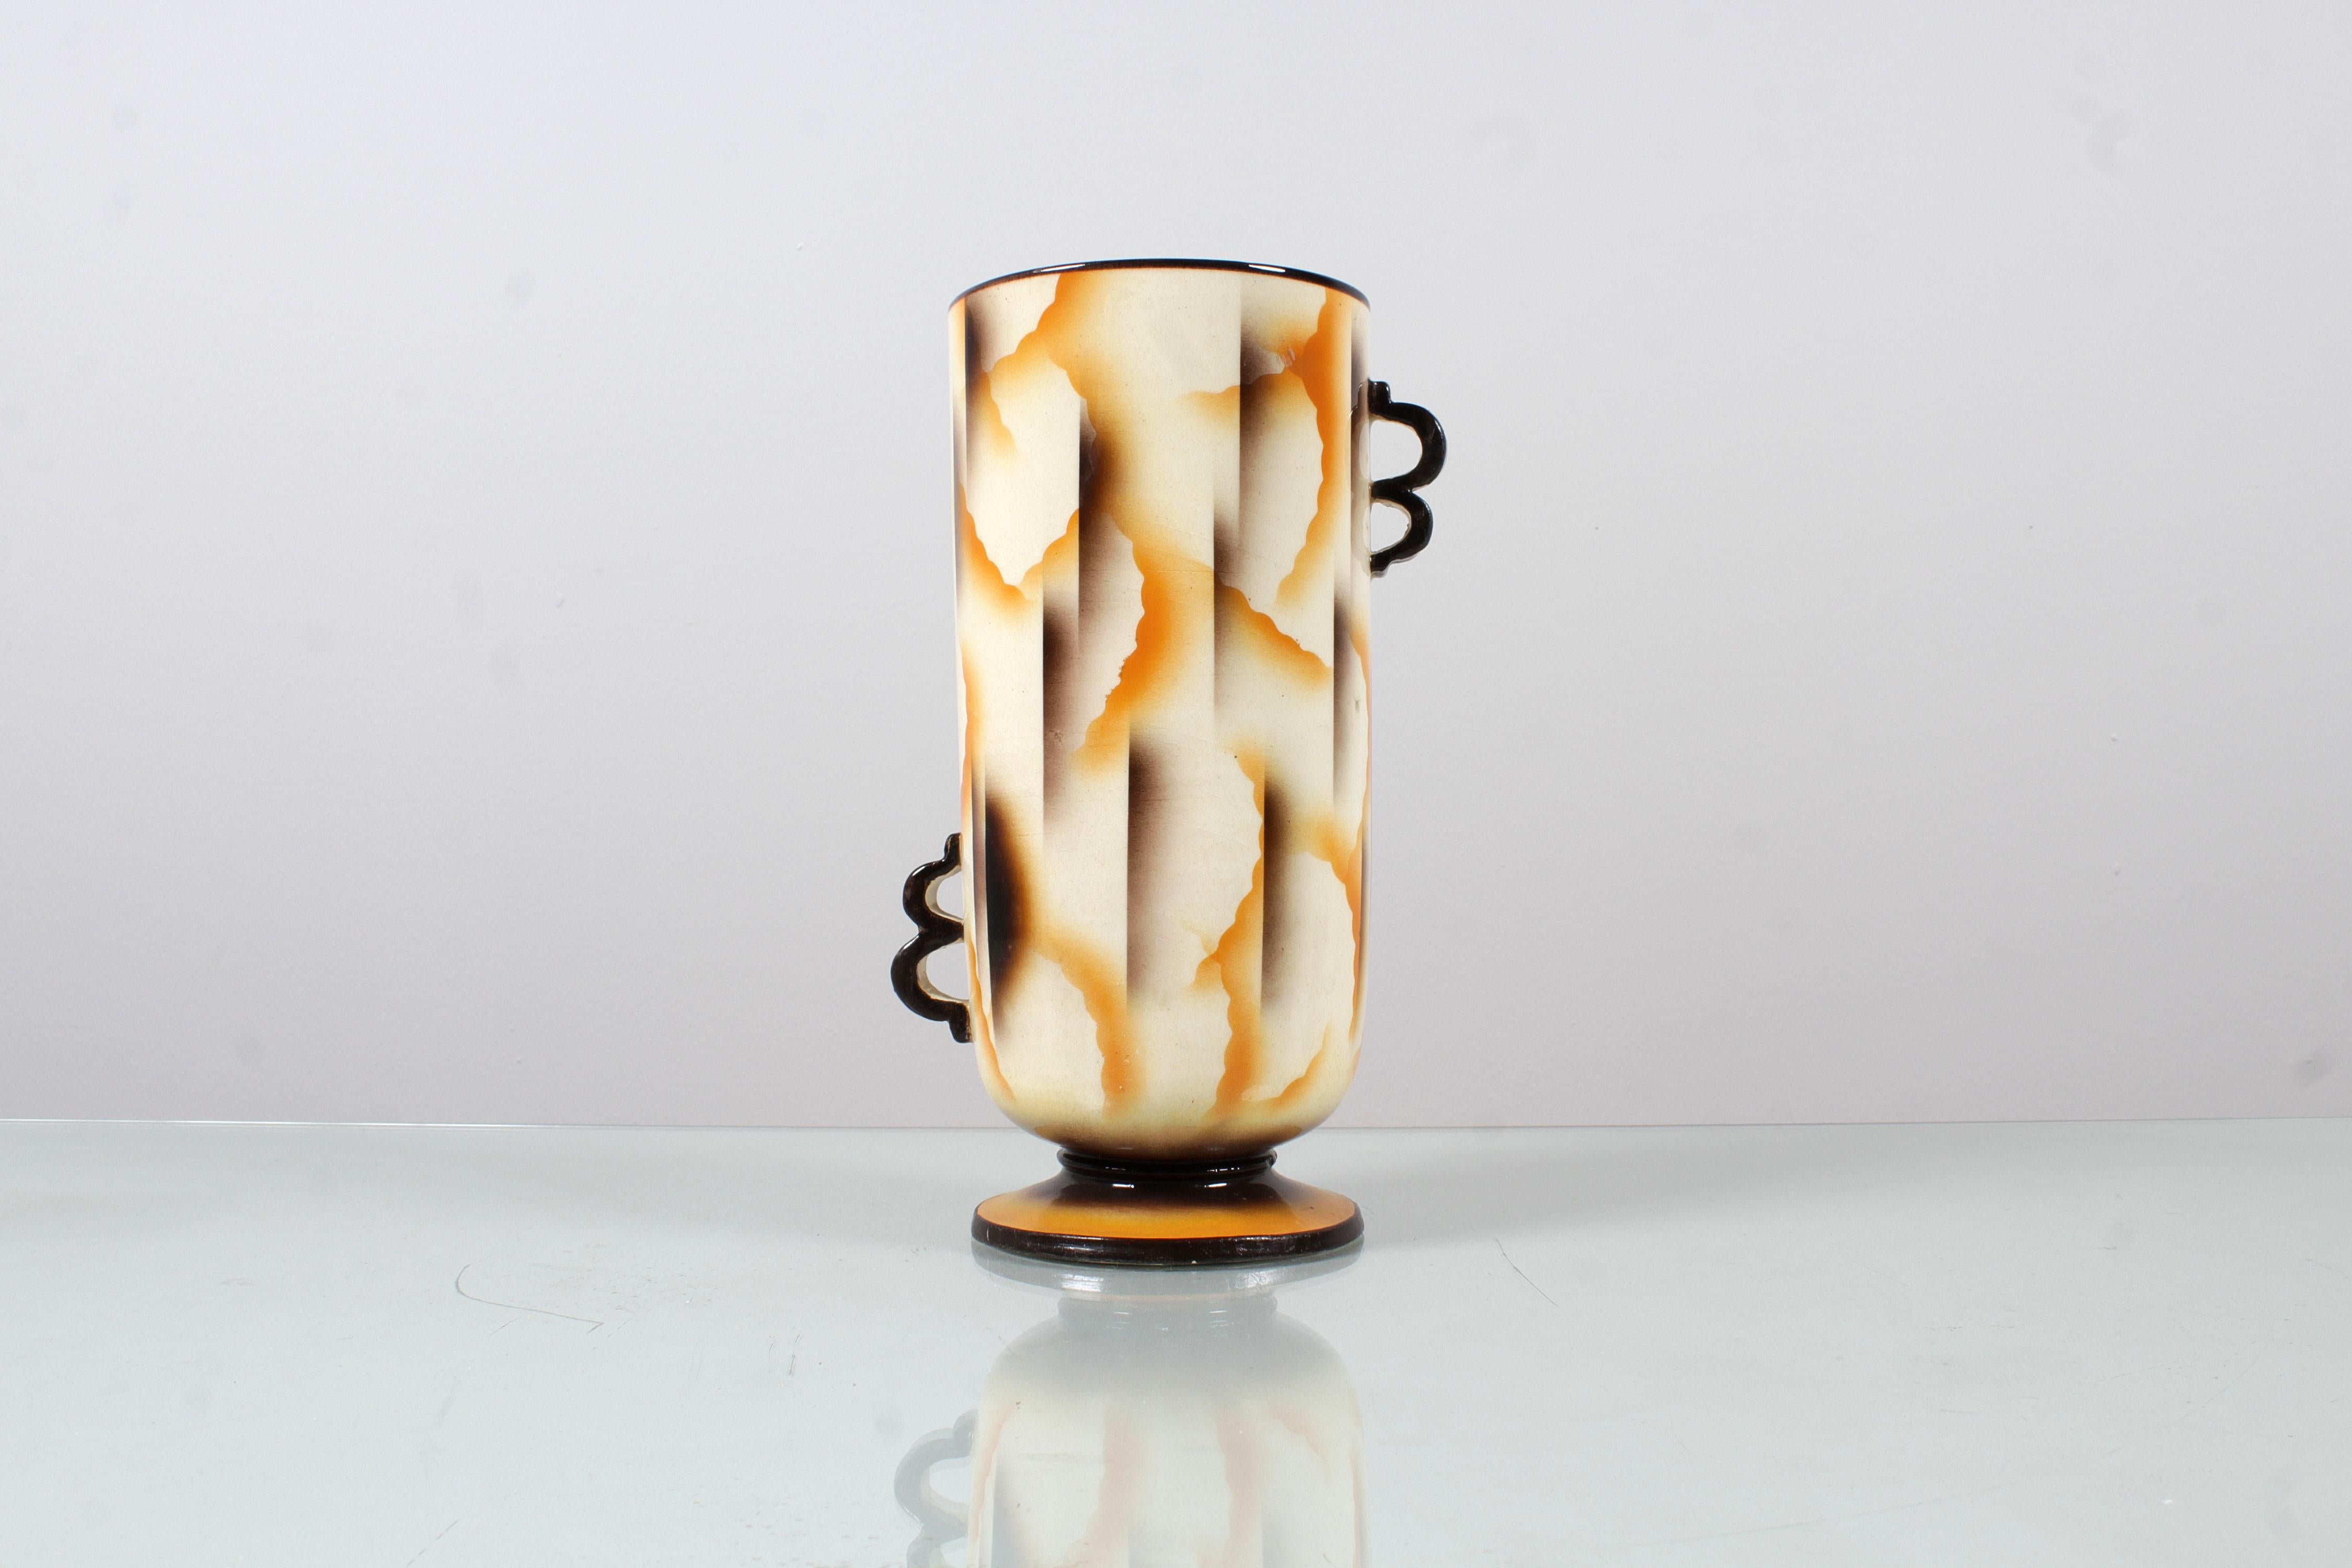 Very rare vase with staggered handles from the 1930s by Carraresi - Lucchesi manufacture (Virgilio Carraresi and Daniele Lucchesi) , Sesto Fiorentino, decorated with the airbrush technique and depicting abstract subjects in brown and orange shades